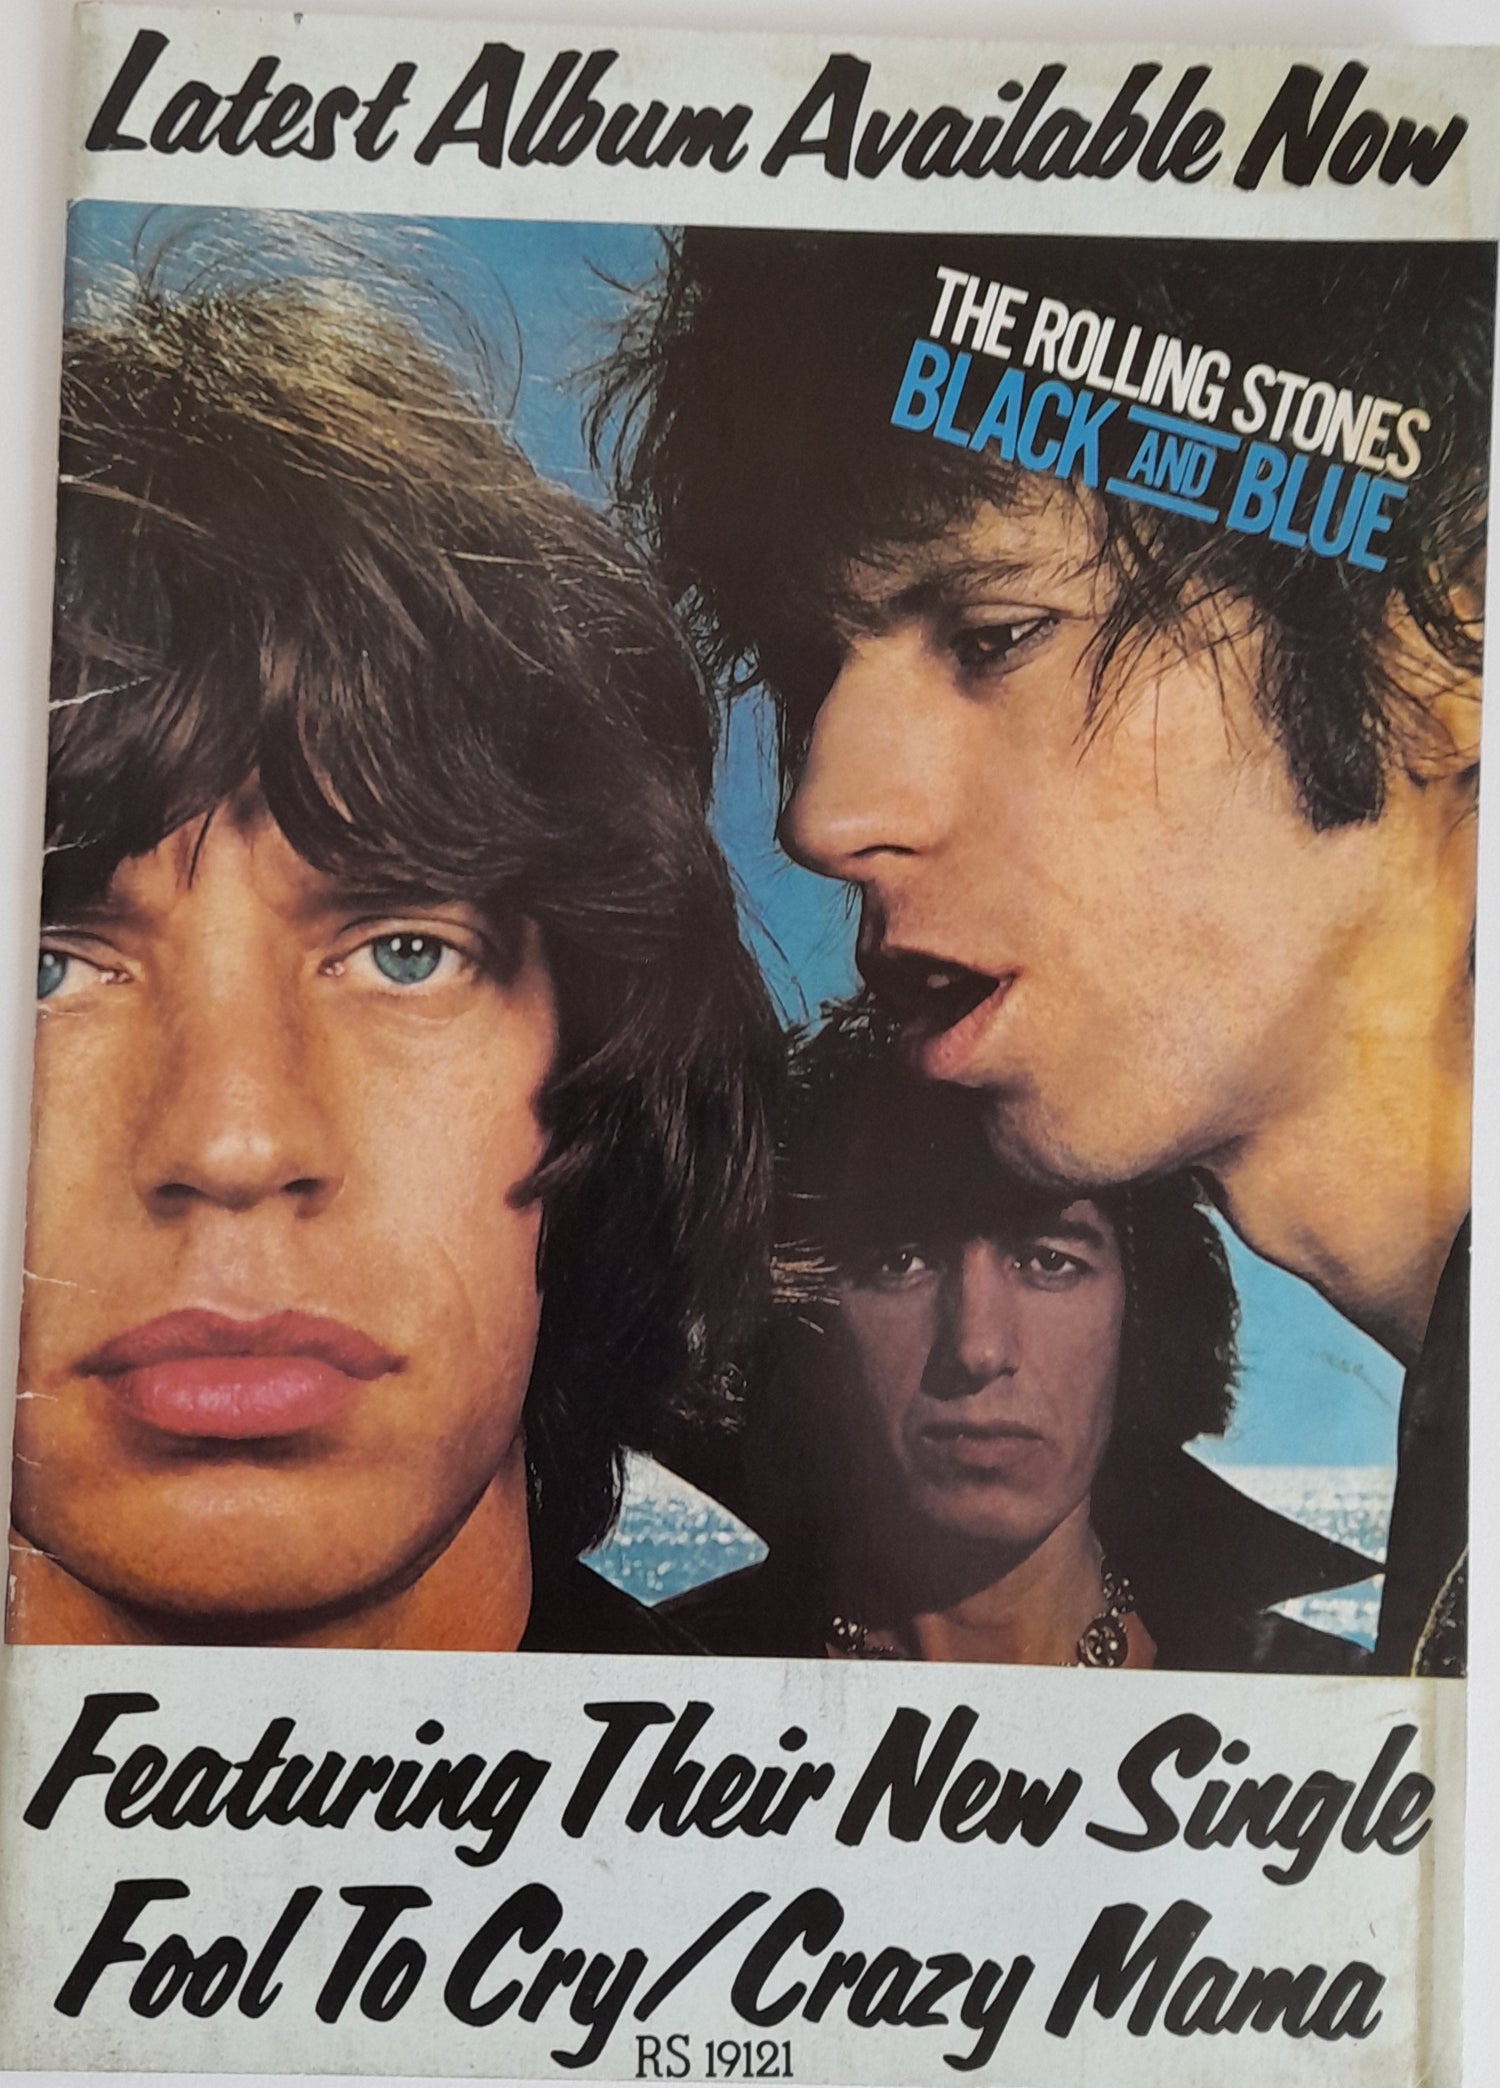 The Rolling Stones Music Programme